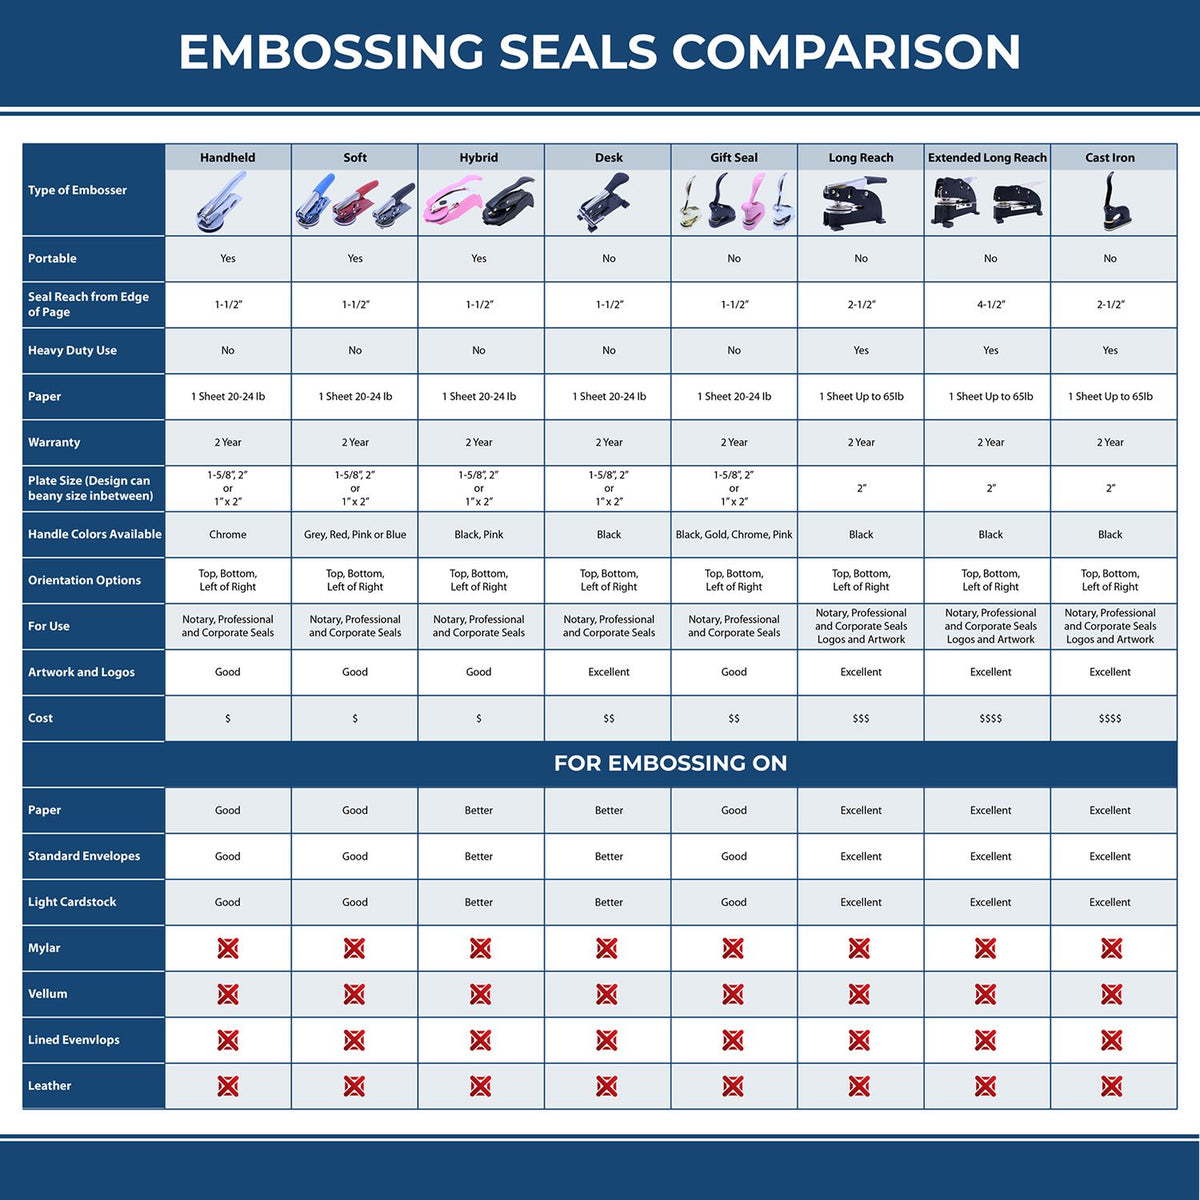 A comparison chart for the different types of mount models available for the Handheld New Hampshire Professional Geologist Embosser